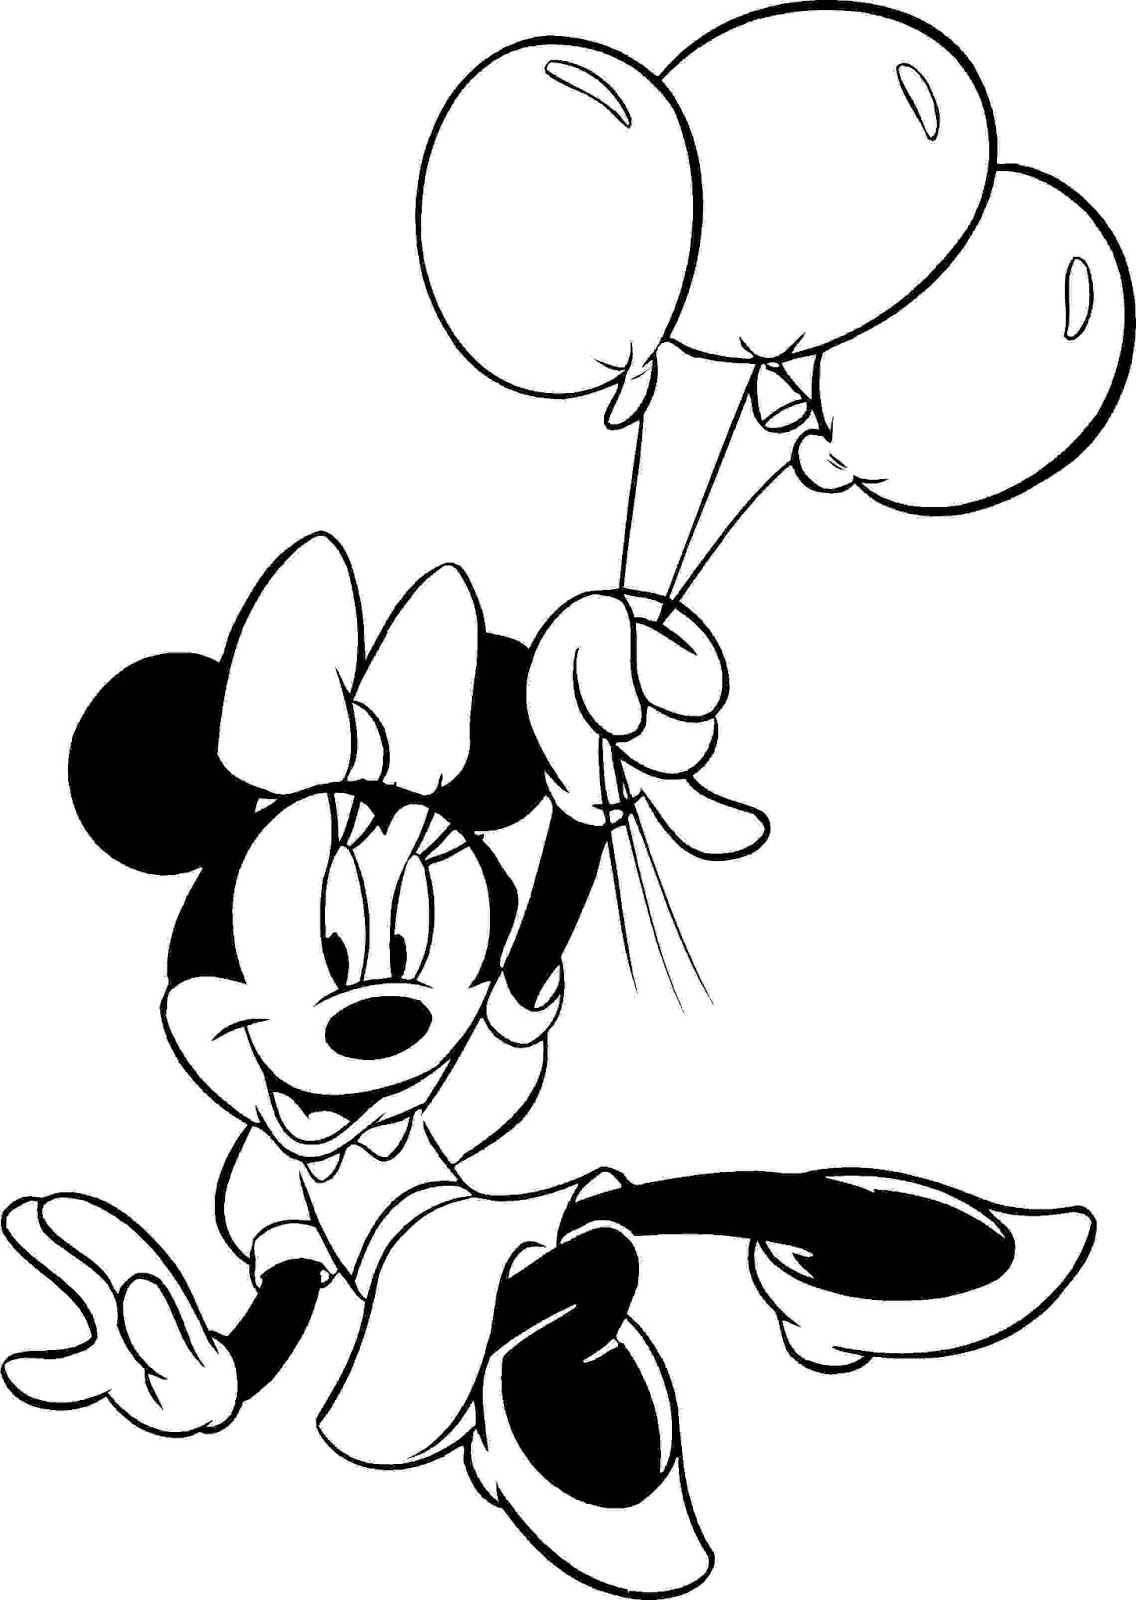 Minnie Mouse Coloring Pages | Free download on ClipArtMag